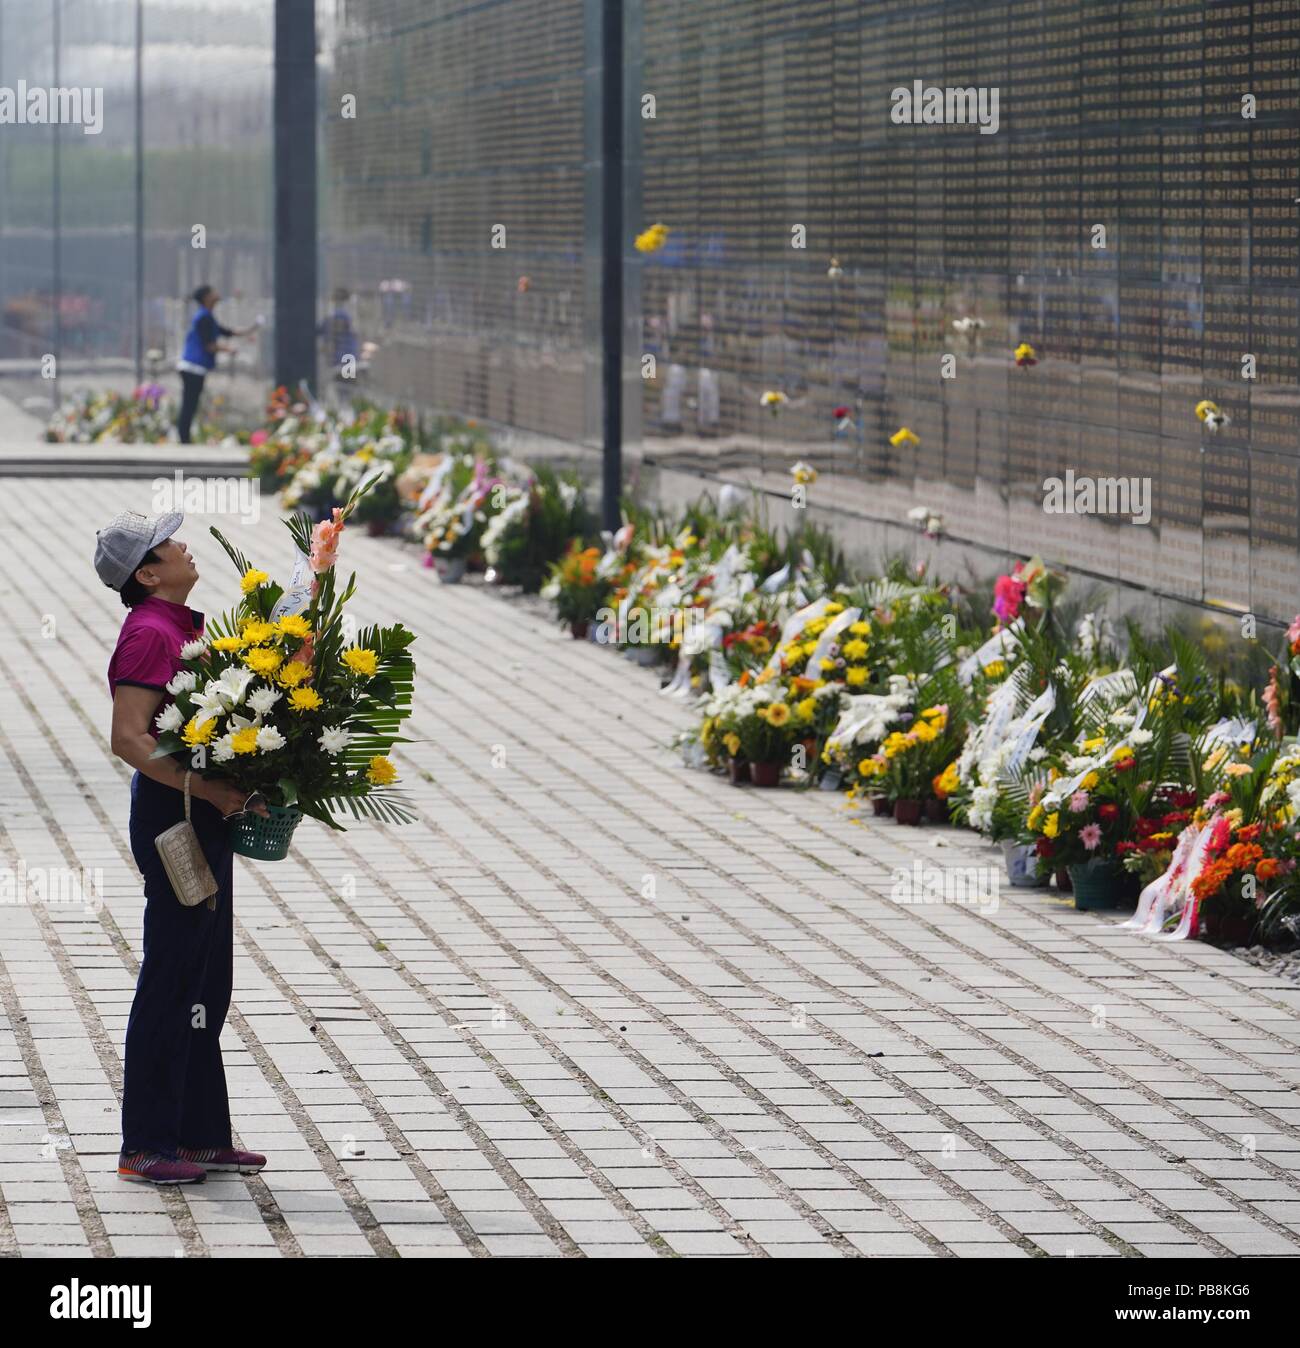 Tangshan. 27th July, 2018. People mourn for relatives killed in the 1976 Tangshan earthquake in front of the memorial wall in Tangshan, north China's Hebei Province, July 27, 2018, one day before the 42nd anniversary of the earthquake. Credit: Dong Jun/Xinhua/Alamy Live News Stock Photo